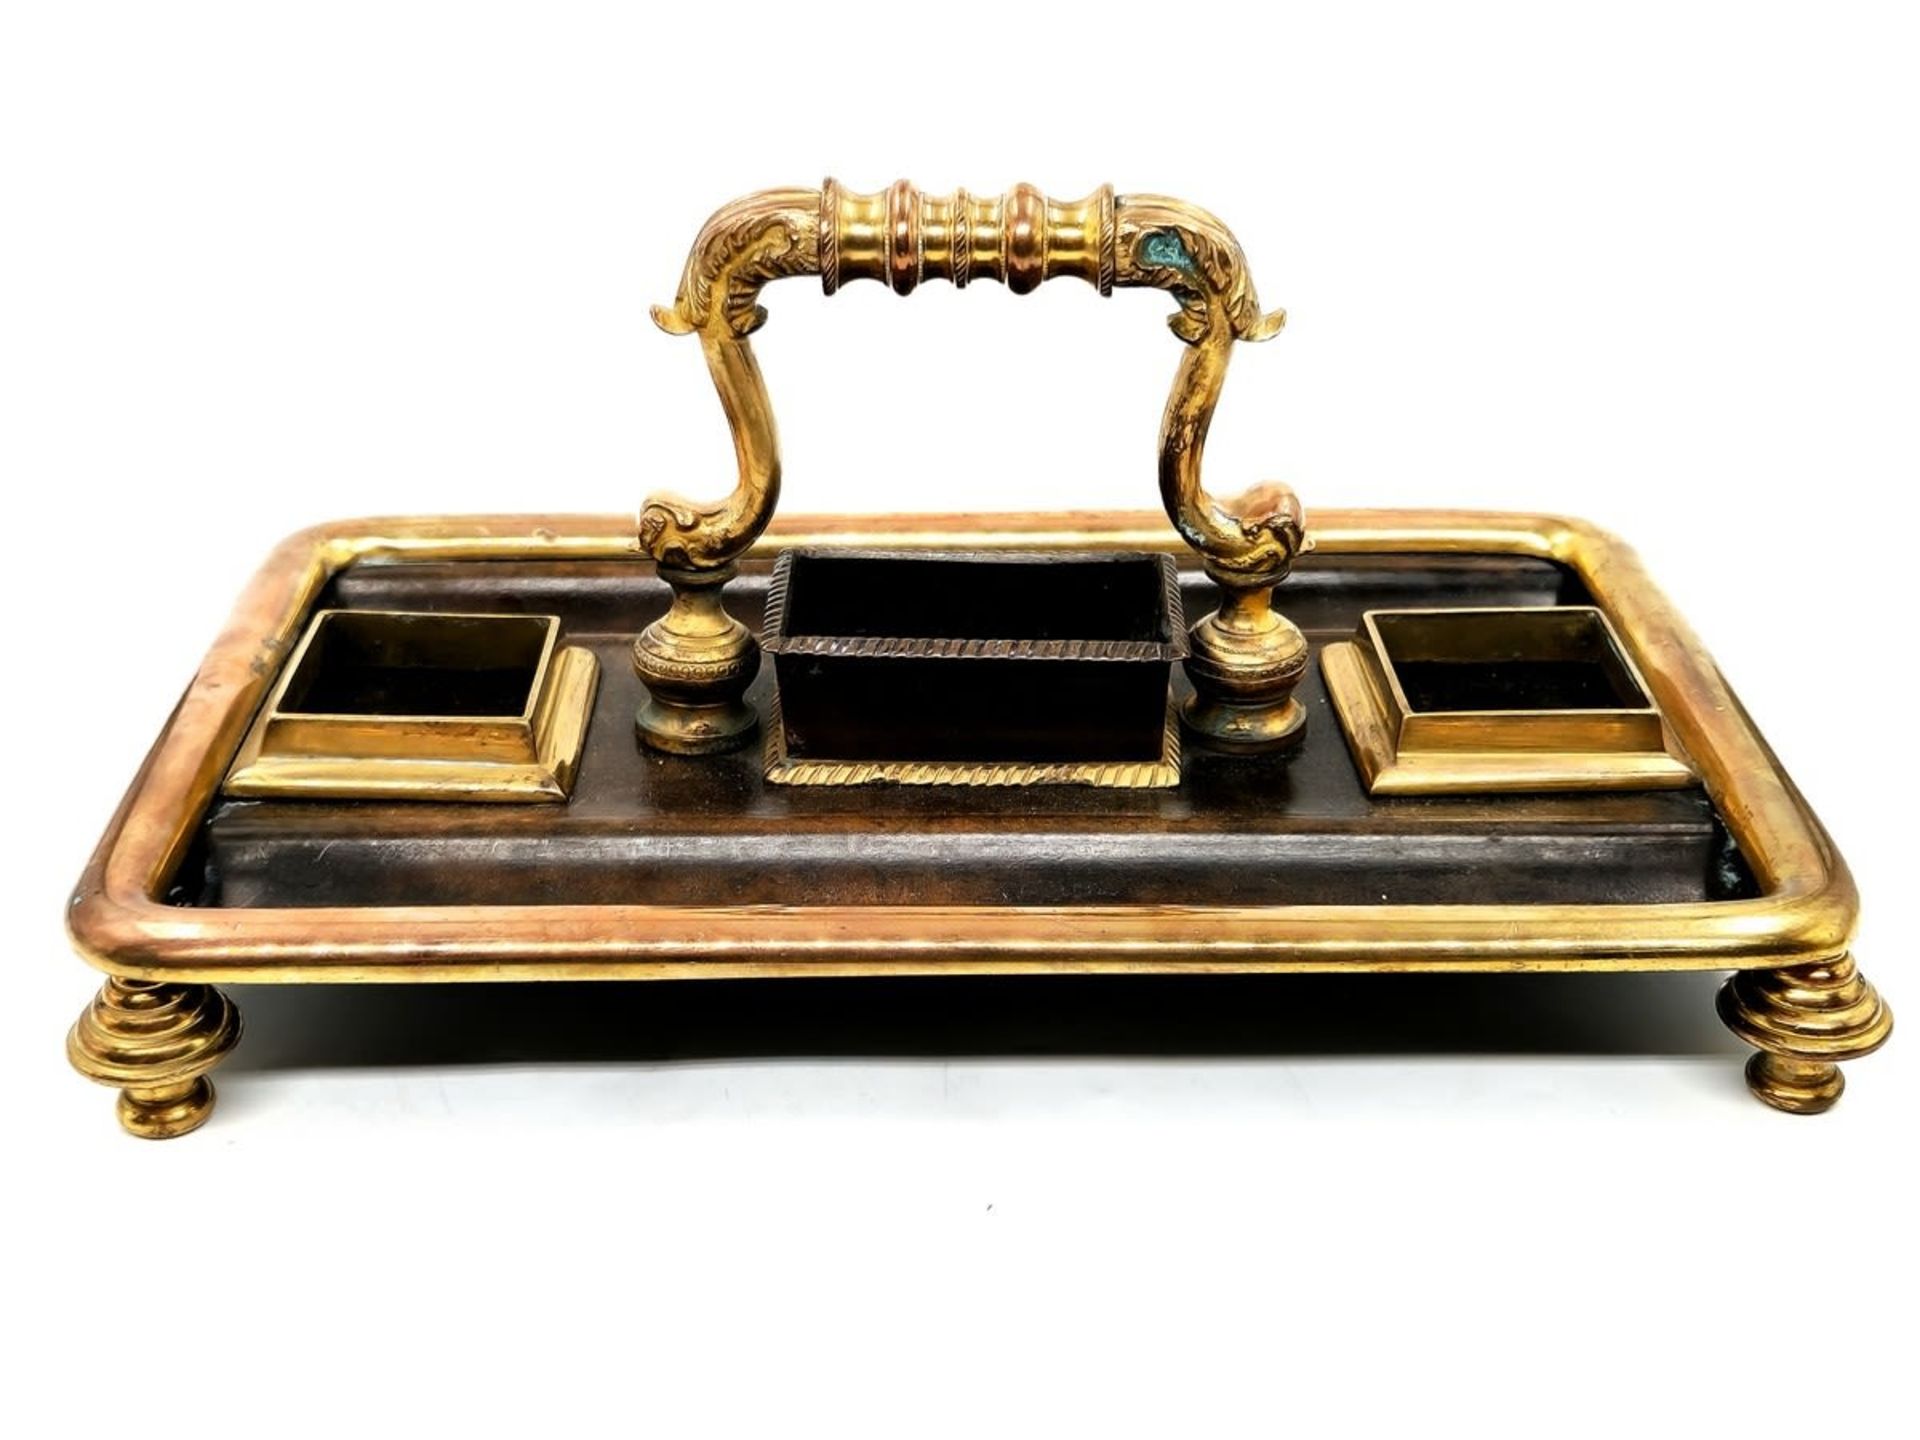 An antique double tabletop inkwell, brass and spelter, the ink wells themselves are made of glass, - Bild 3 aus 7